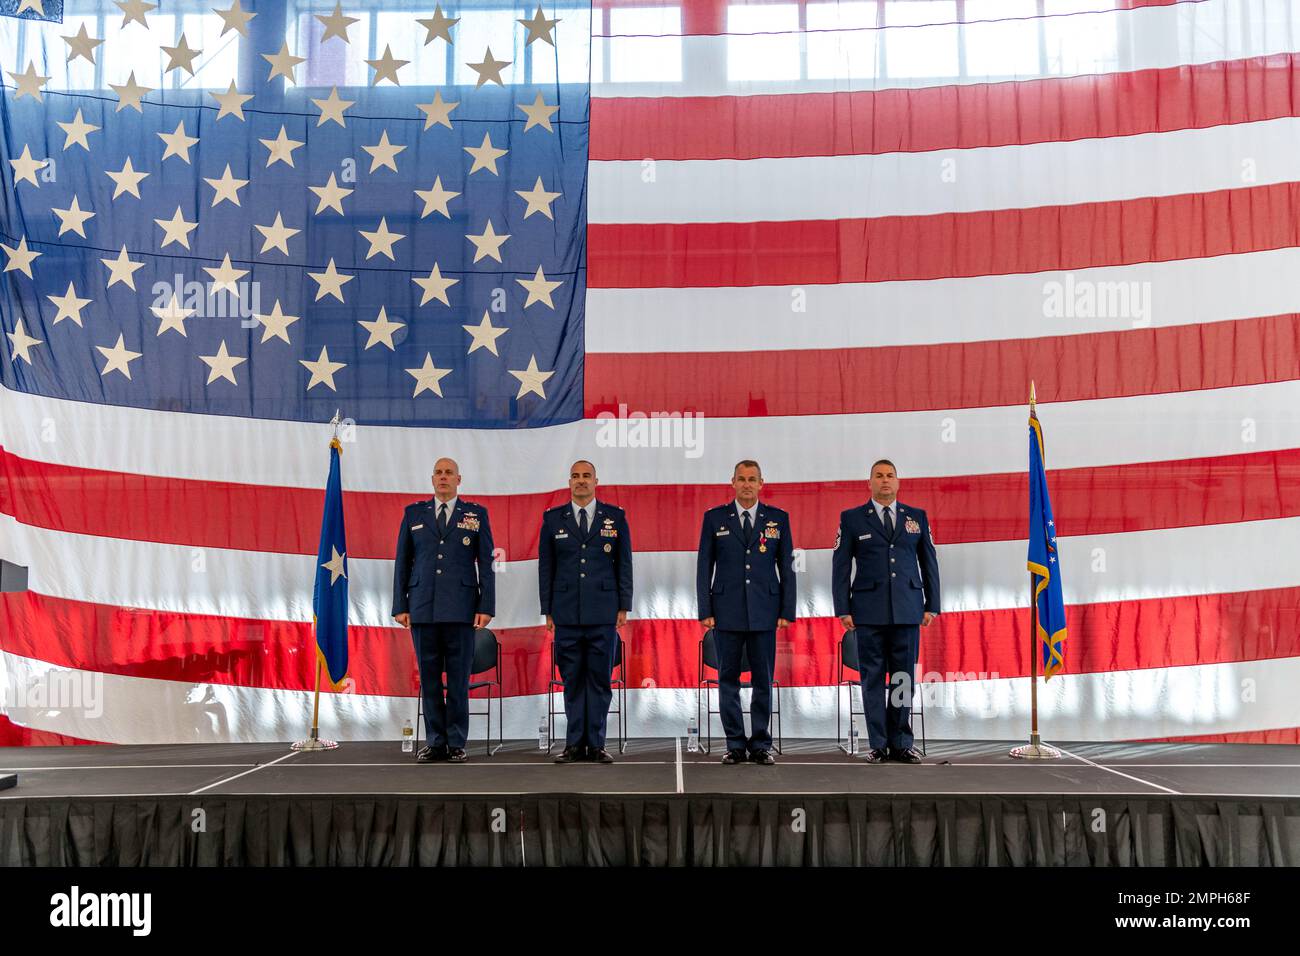 U.S. Air Force Brig. Gen. Gary McCue, Deputy Assistant Adjutant General for Air, Ohio National Guard, Col. Chad Holesko, incoming commander of the Ohio National Guard’s 180th Fighter Wing, Col. Michael DiDio, outgoing 180FW Commander and Chief Master Sgt. Daniel Baumert, Command Chief, 180FW, stand at attention during a Change of Command ceremony at the 180FW in Swanton, Ohio, Oct. 15, 2022. During the ceremony, outgoing 180FW commander, DiDio, relinquished command to incoming commander, Holesko. Stock Photo